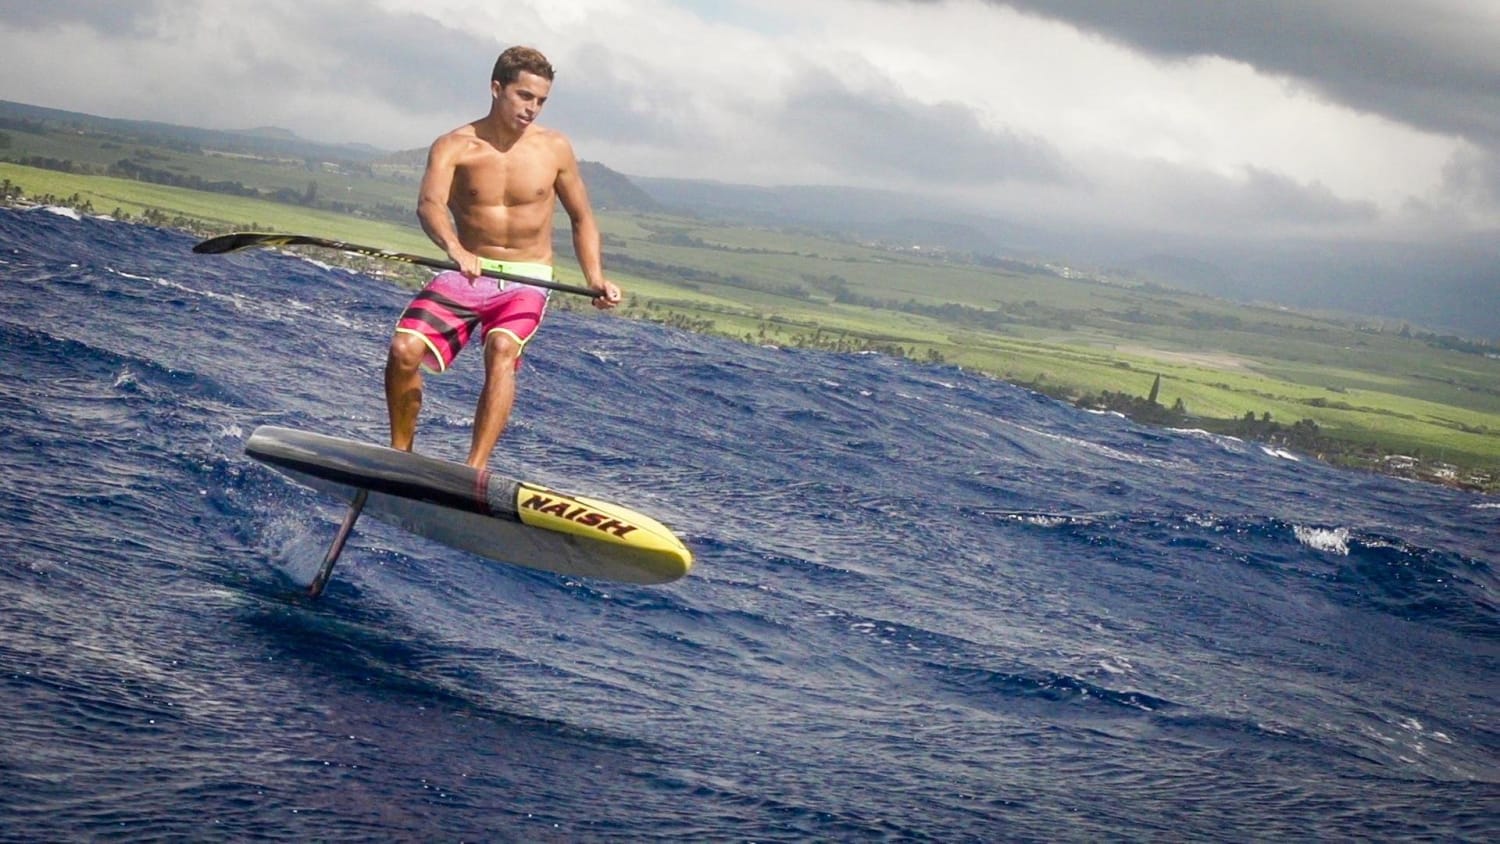 Watch a stand-up paddle board fly in the water